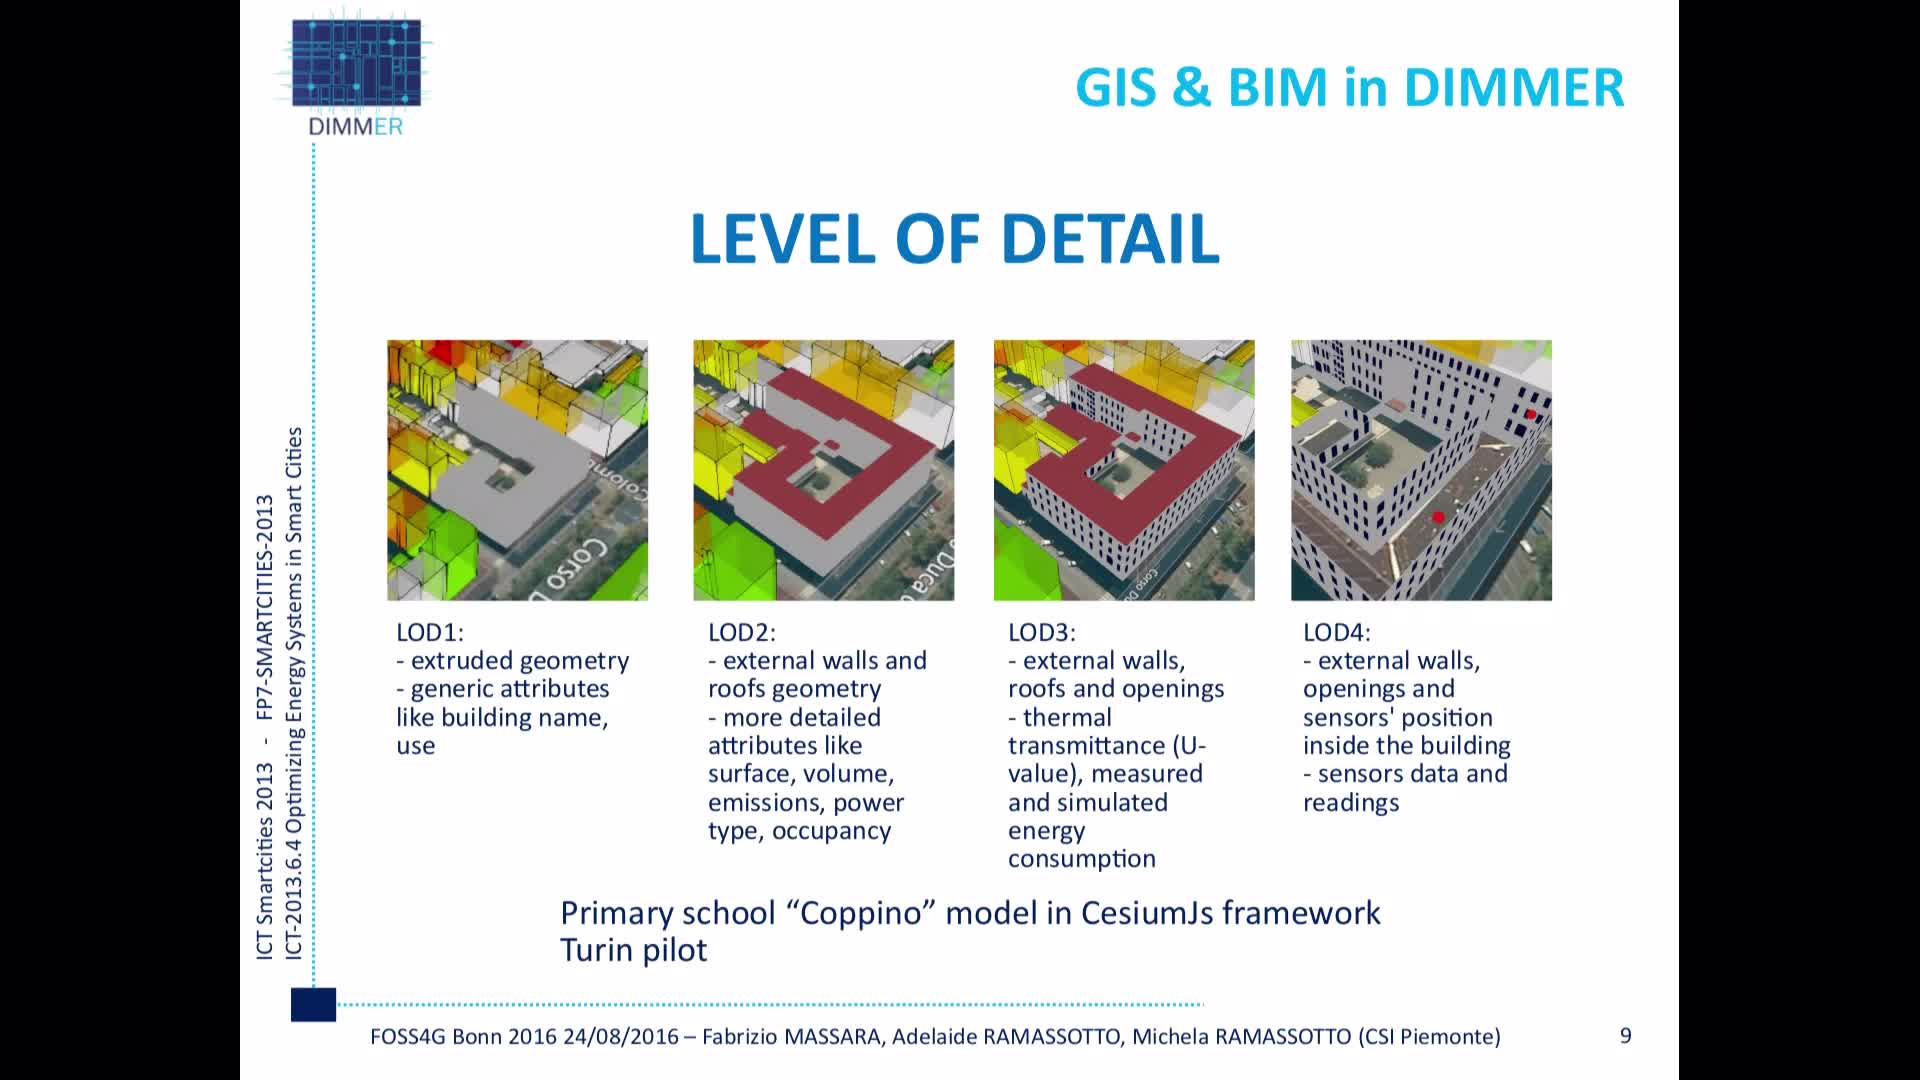 Trying to visualize GIS & BIM information on the web: a solution